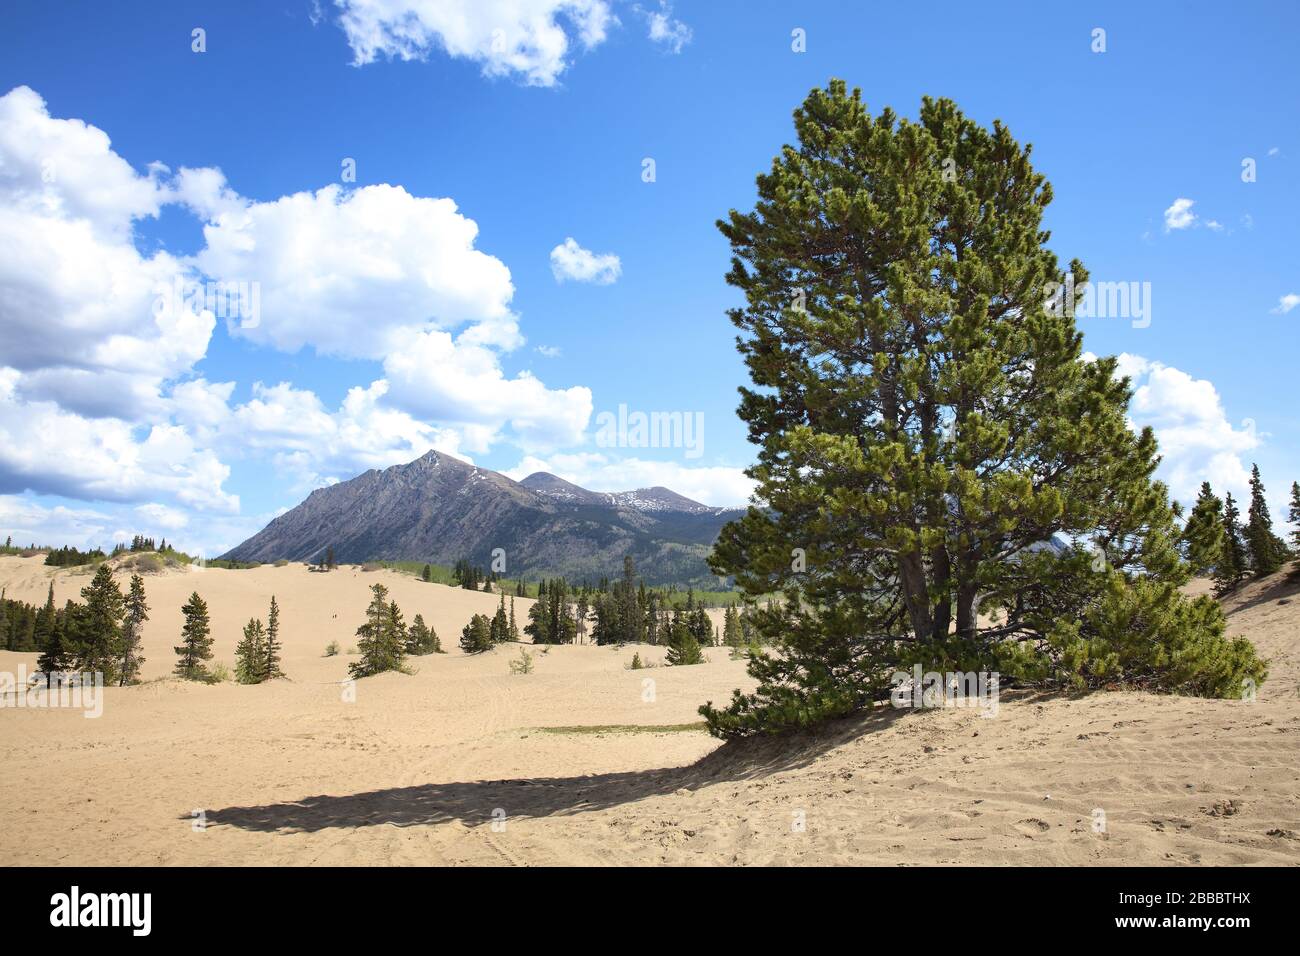 Approximately 1 square mile of sand dunes that originally formed the bottom a lake which subsequently dried up. Located outside Carcross, Yukon Territory, Canada Stock Photo